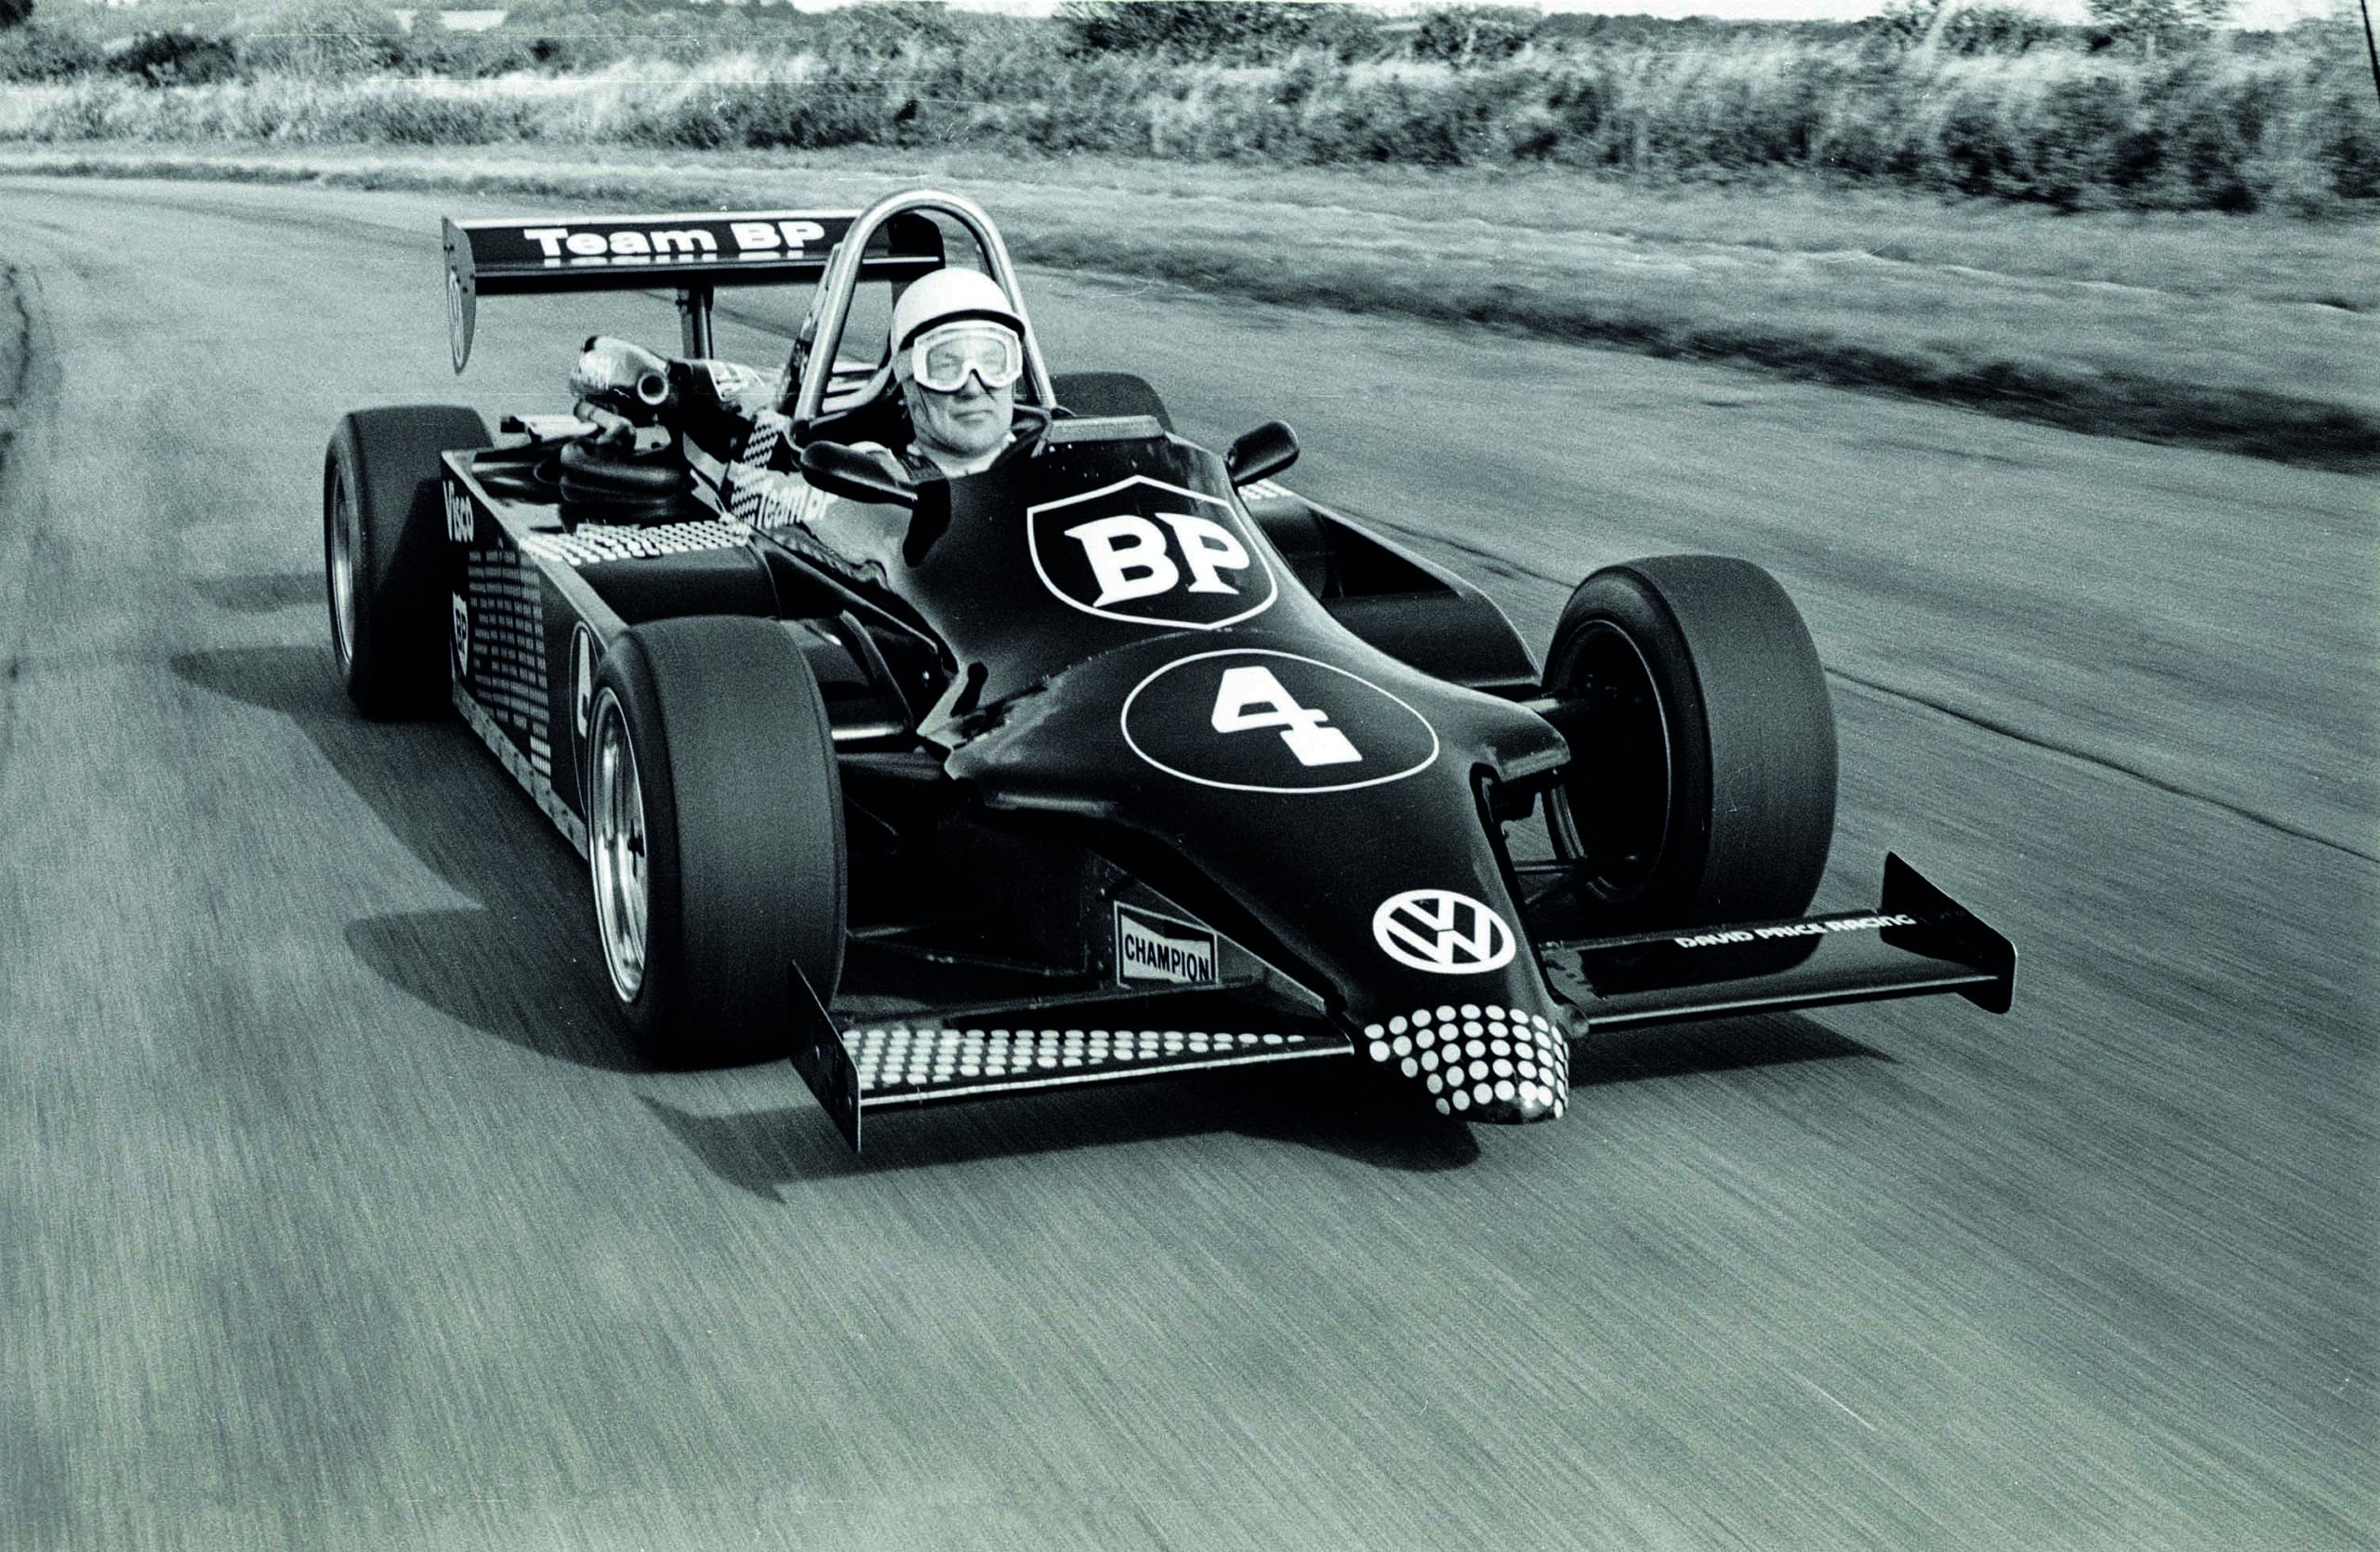 Stirling Moss in BP Formula 3 car at Thruxton in 1983